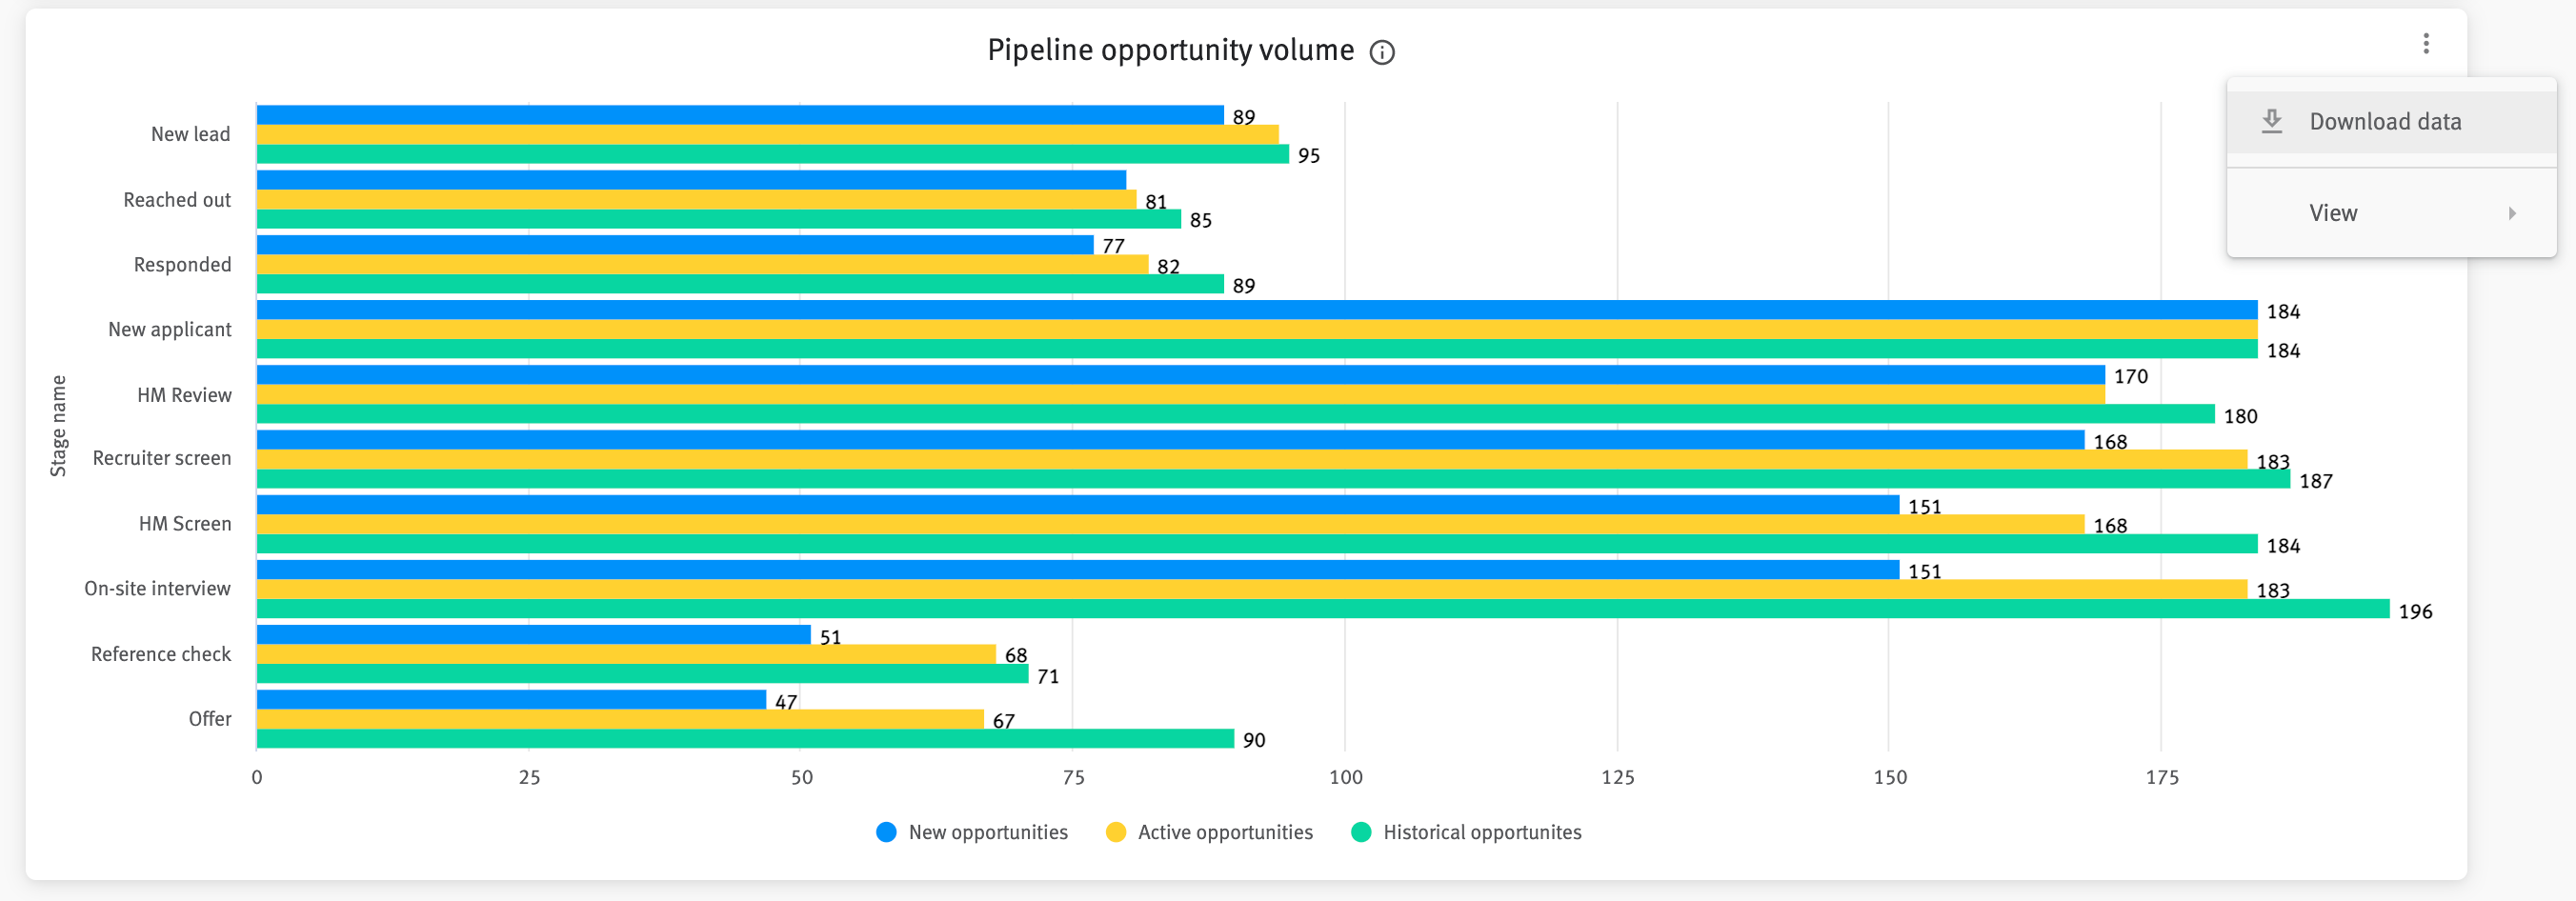 Pipeline opportunity volumemn chart with Download data button extended from upper right corner.